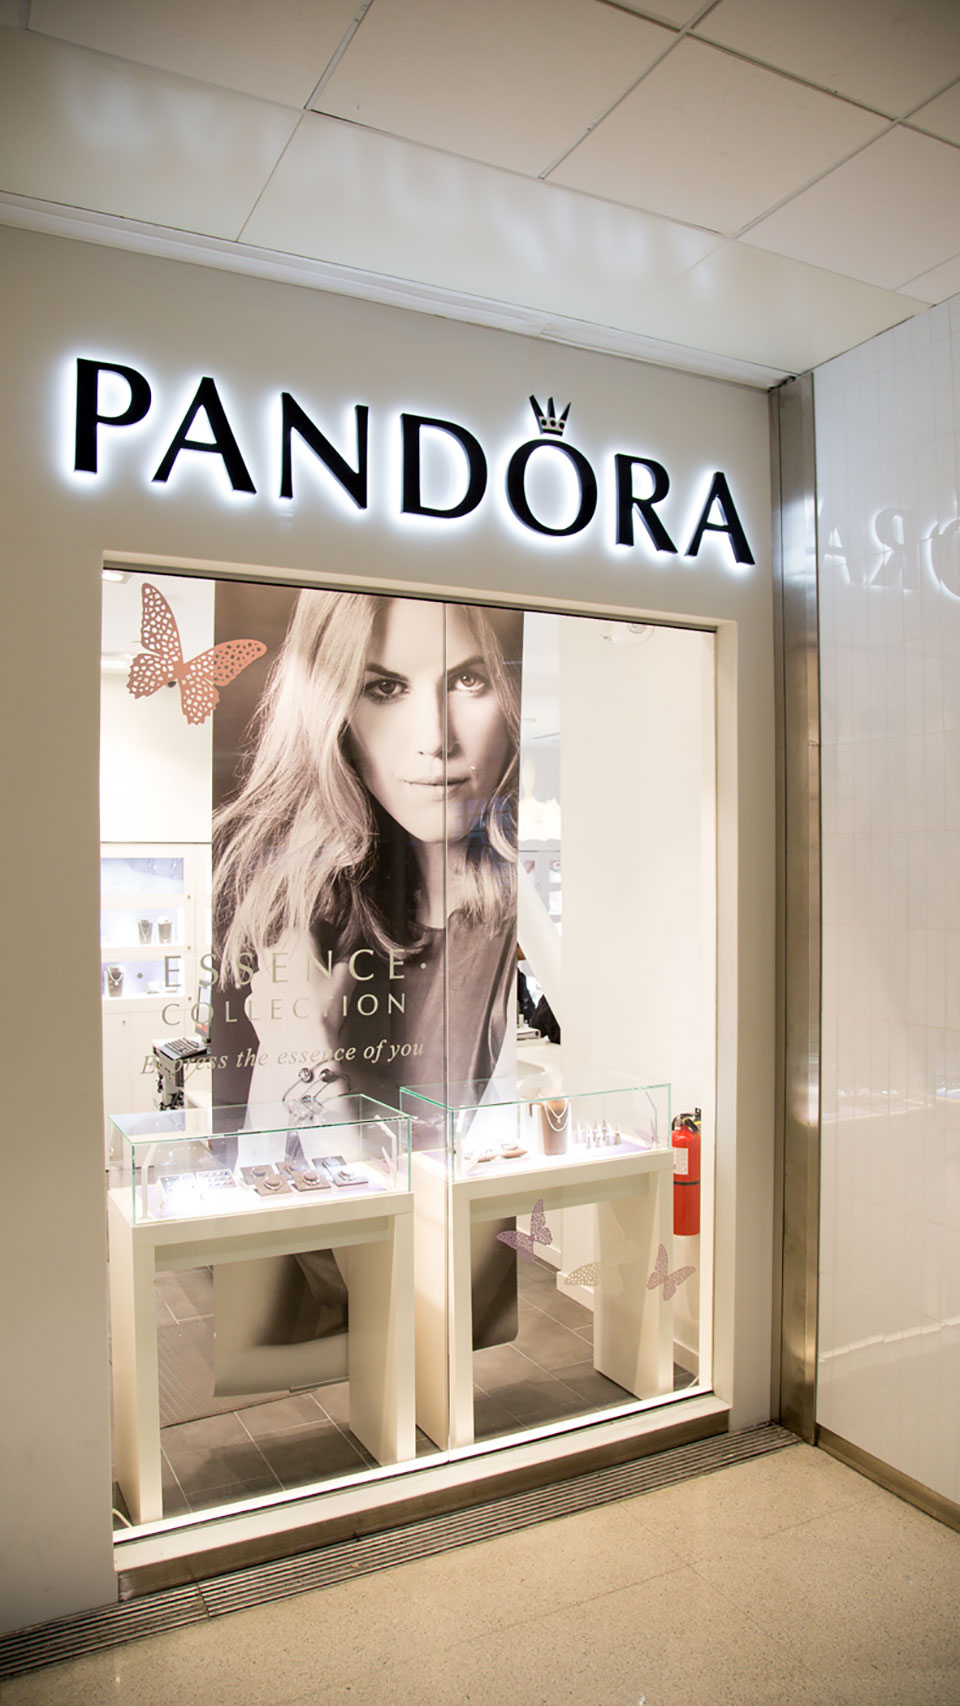 External view of Pandora shop window with the name in large backlit letters over the window.